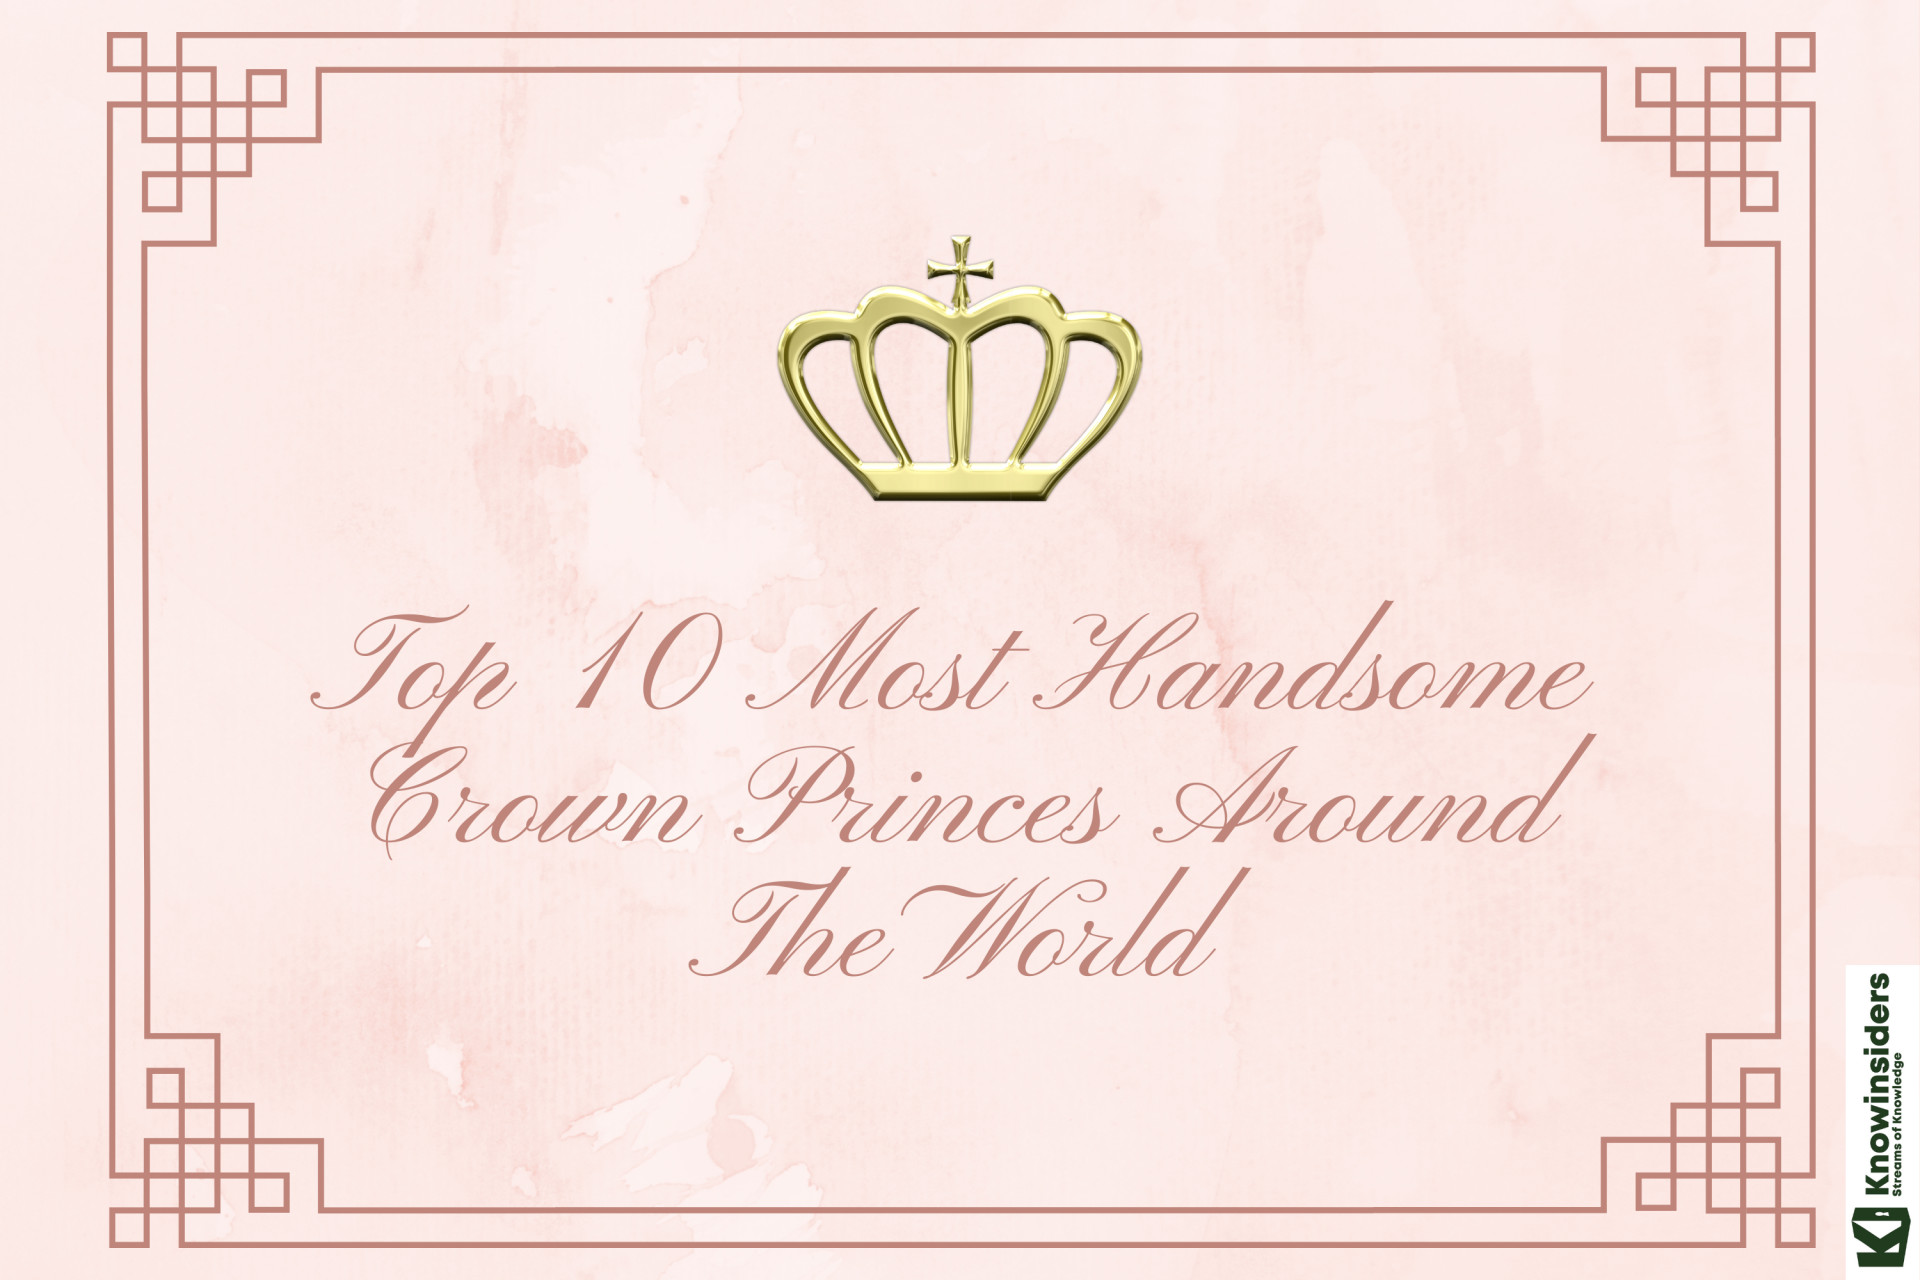 Top 10 Most Handsome Crown Princes Around The World